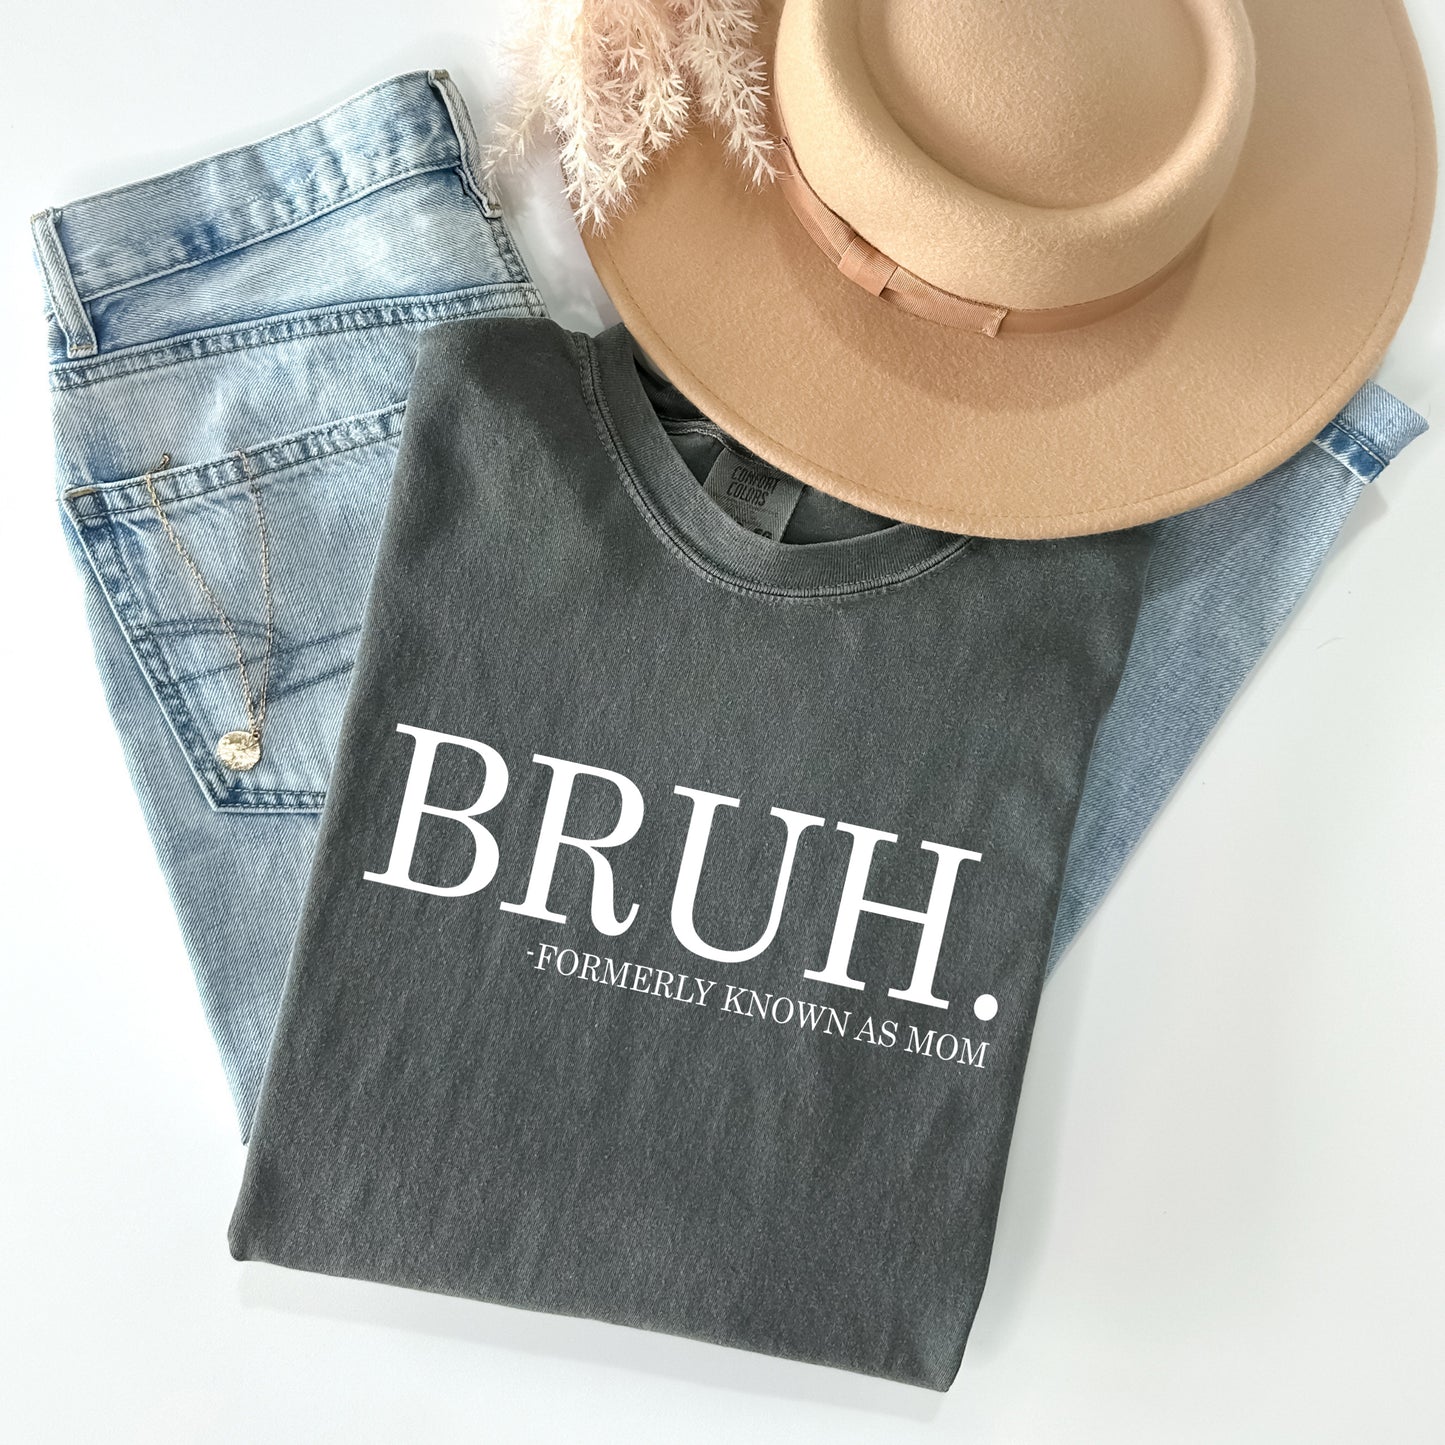 Bruh Formerly Known as Mom Graphic Tee